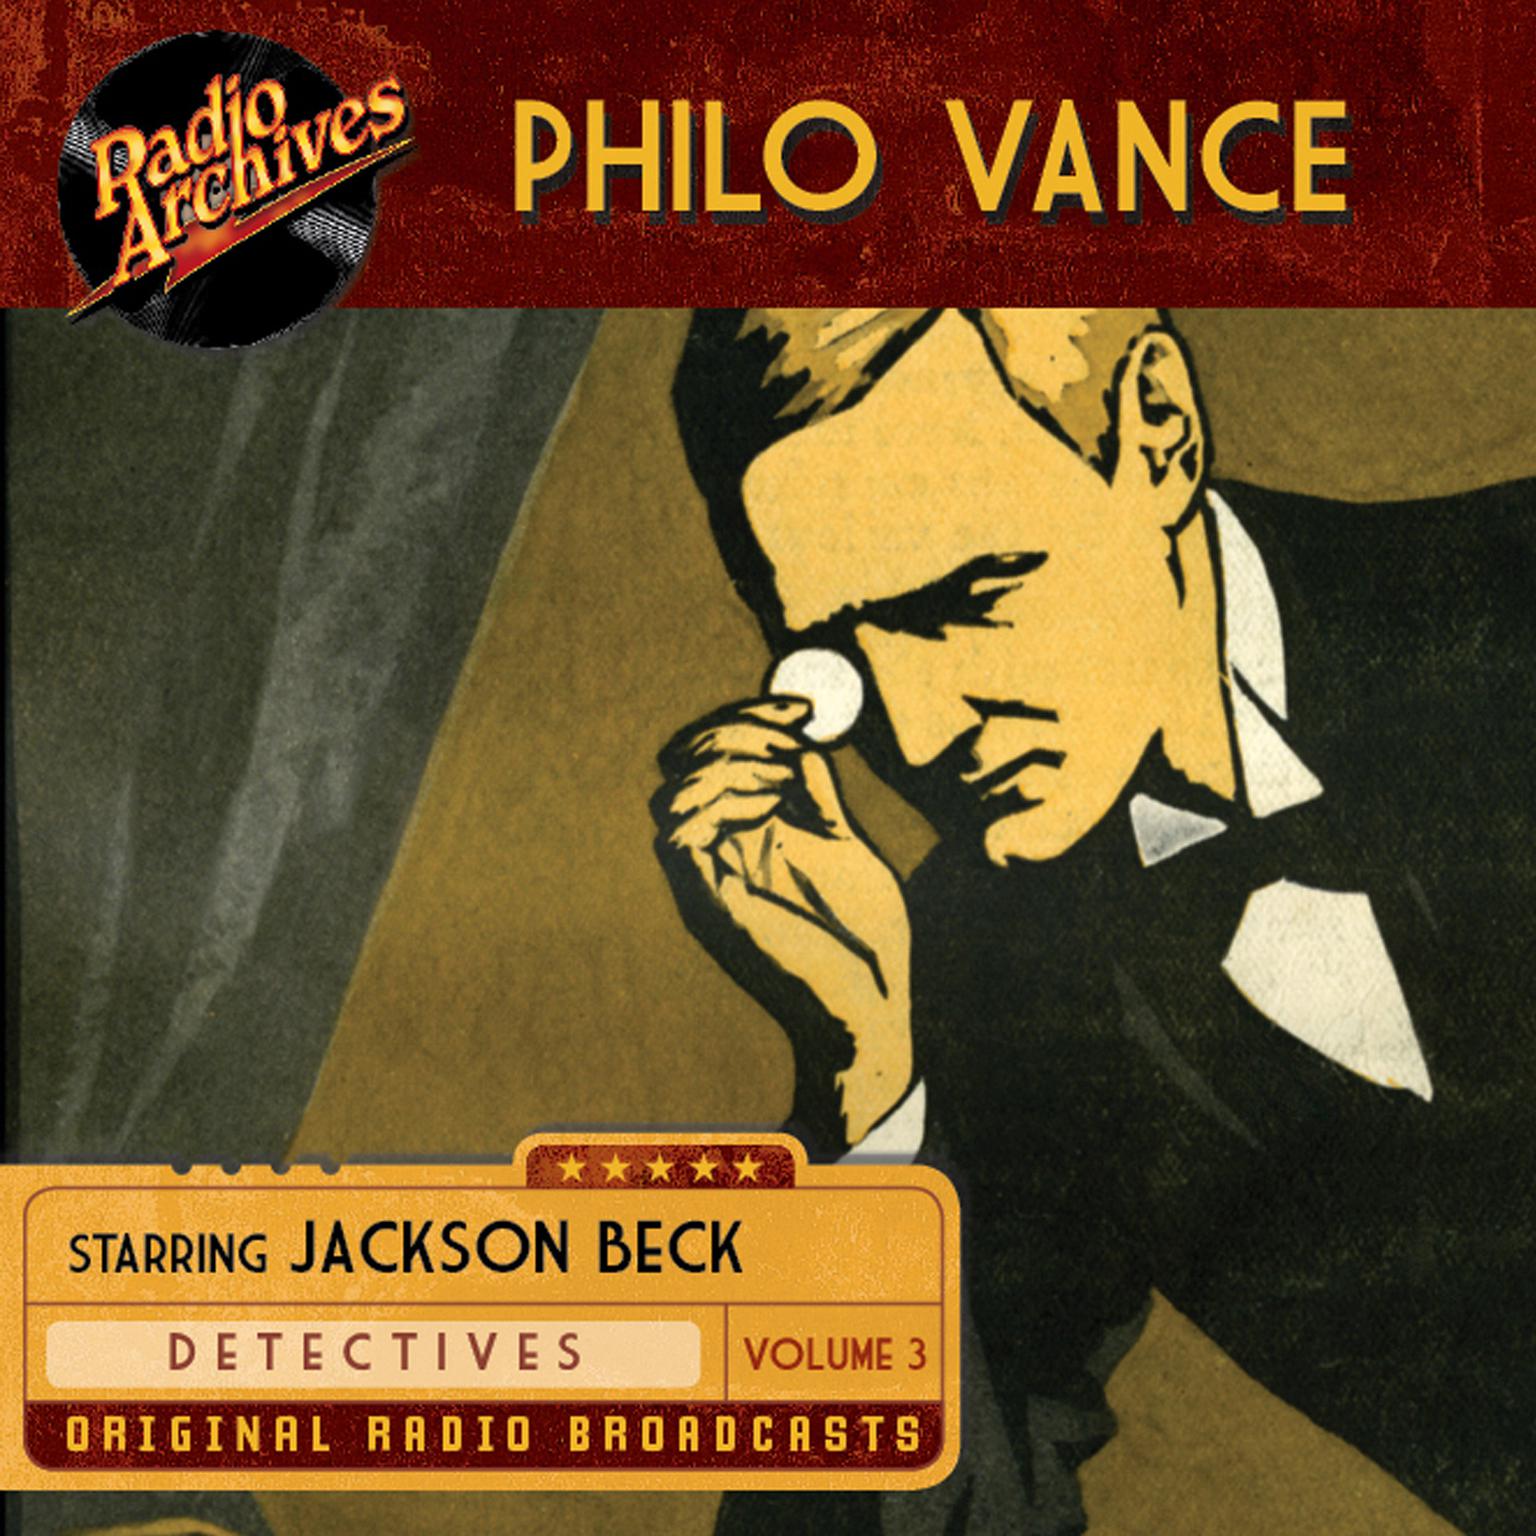 Philo Vance, Vol. 3 Audiobook, by various authors